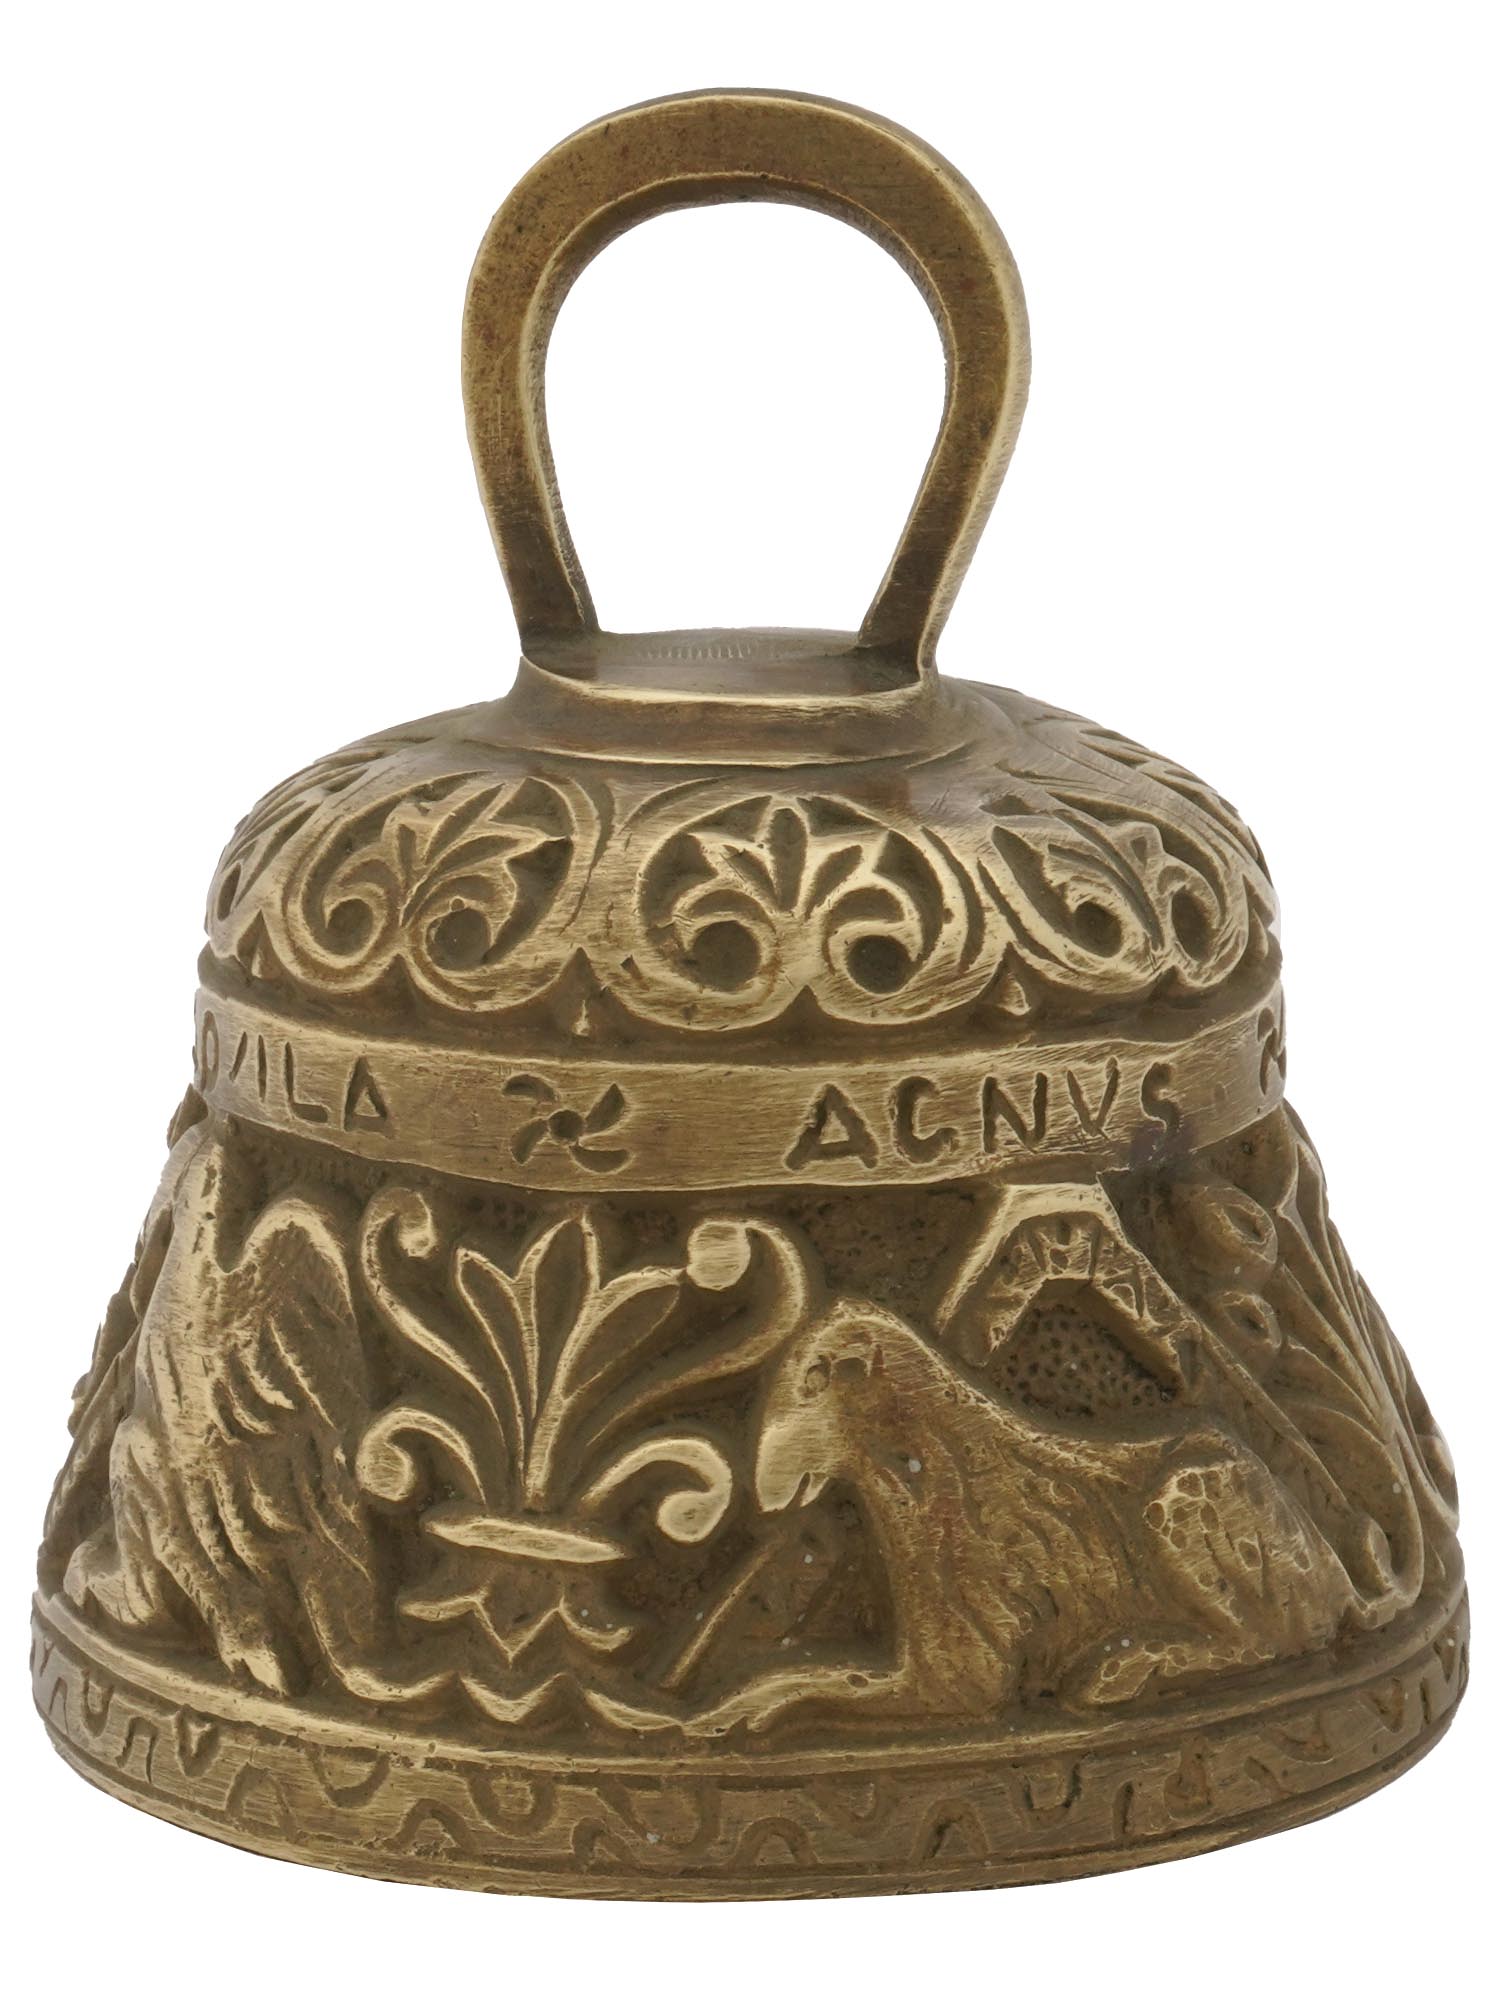 CAST BRONZE CHURCH HAND BELL WITH ANIMAL RELIEF PIC-0